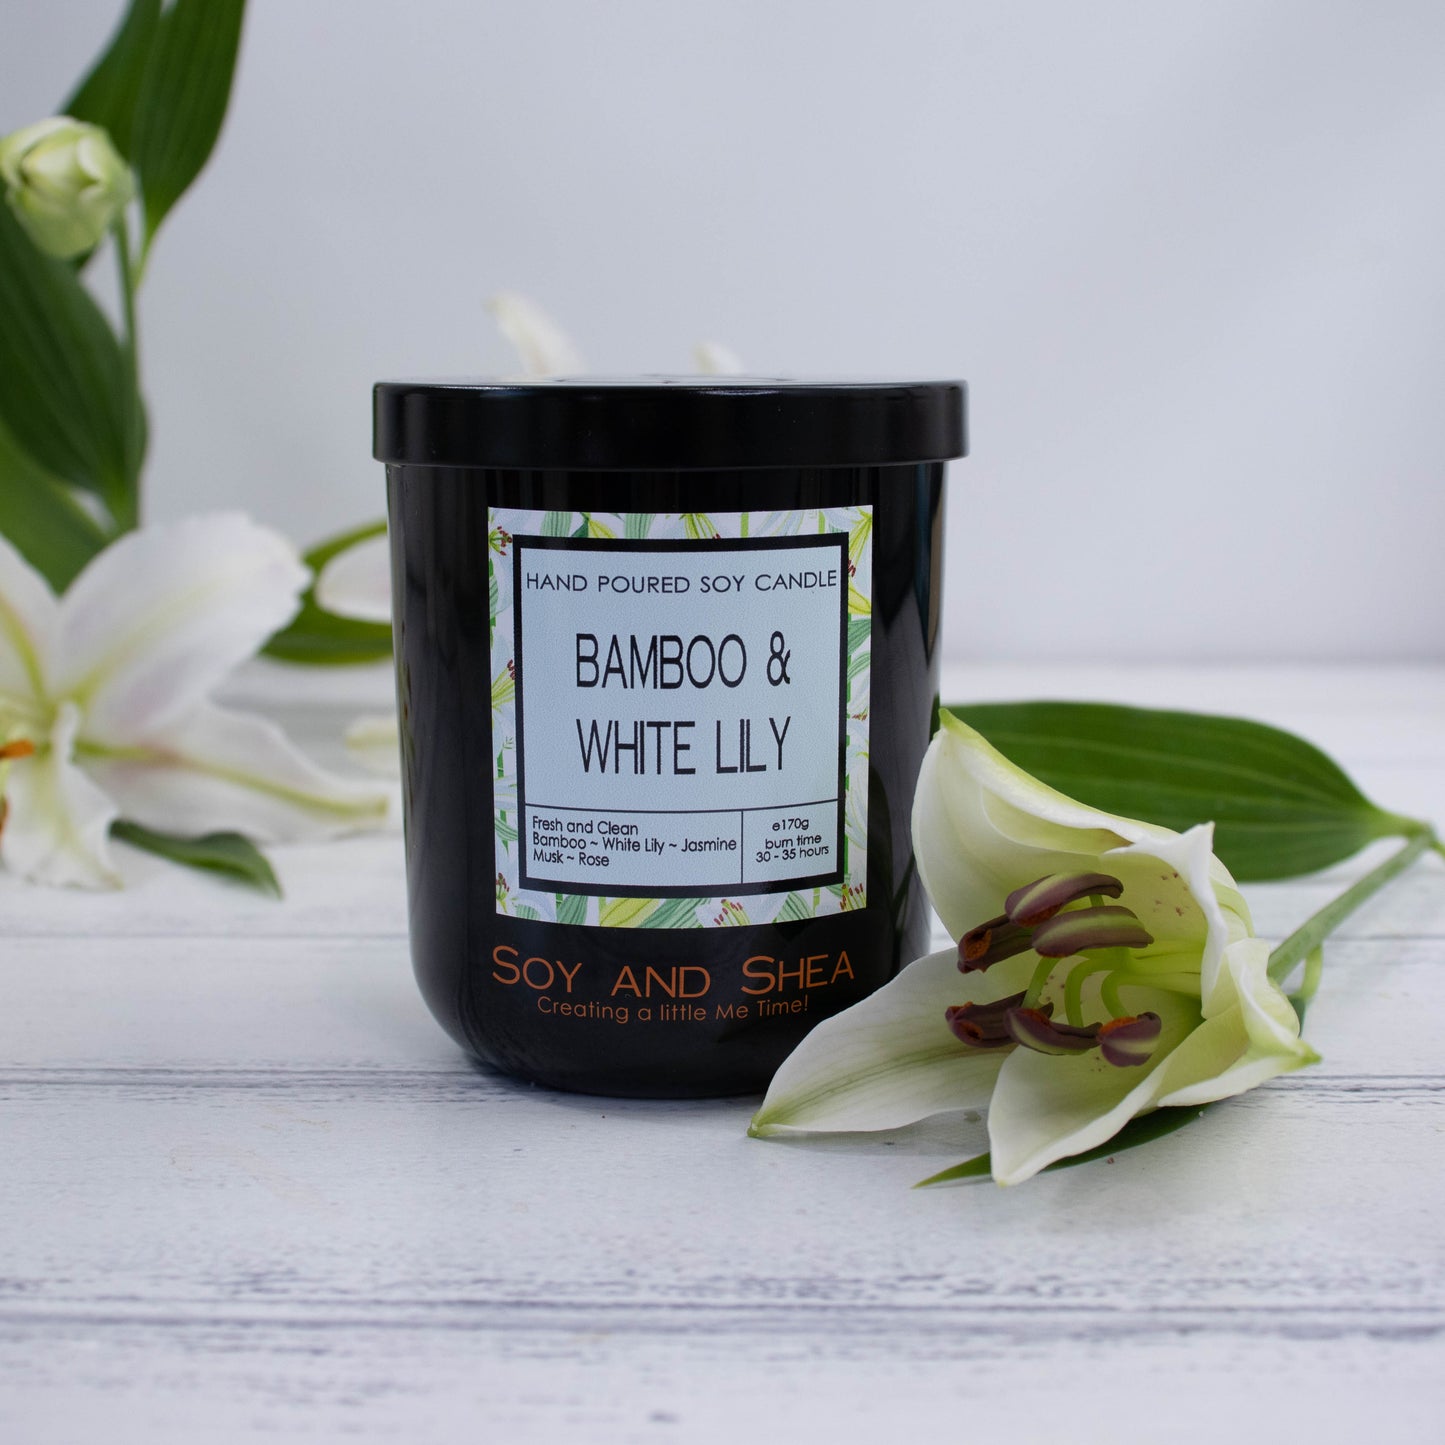 Bamboo & White Lily Soy Candle